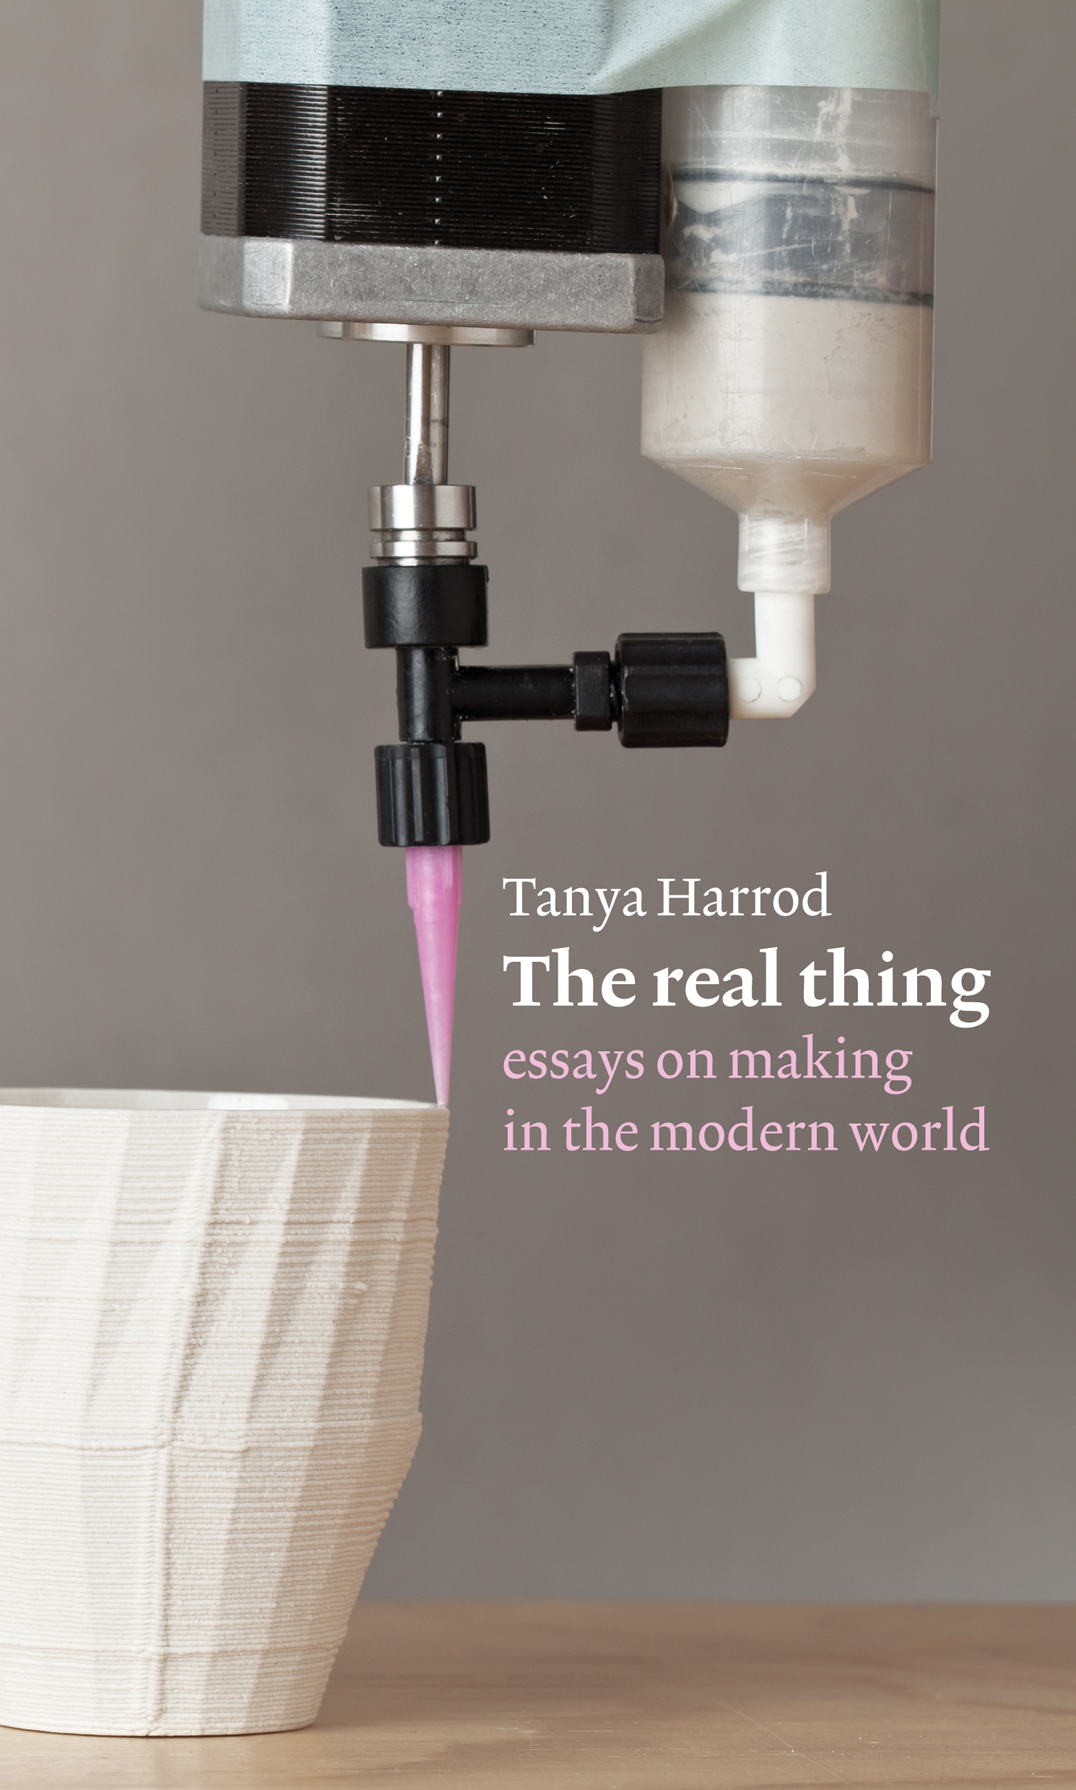 The real thing: essays on making in the modern world